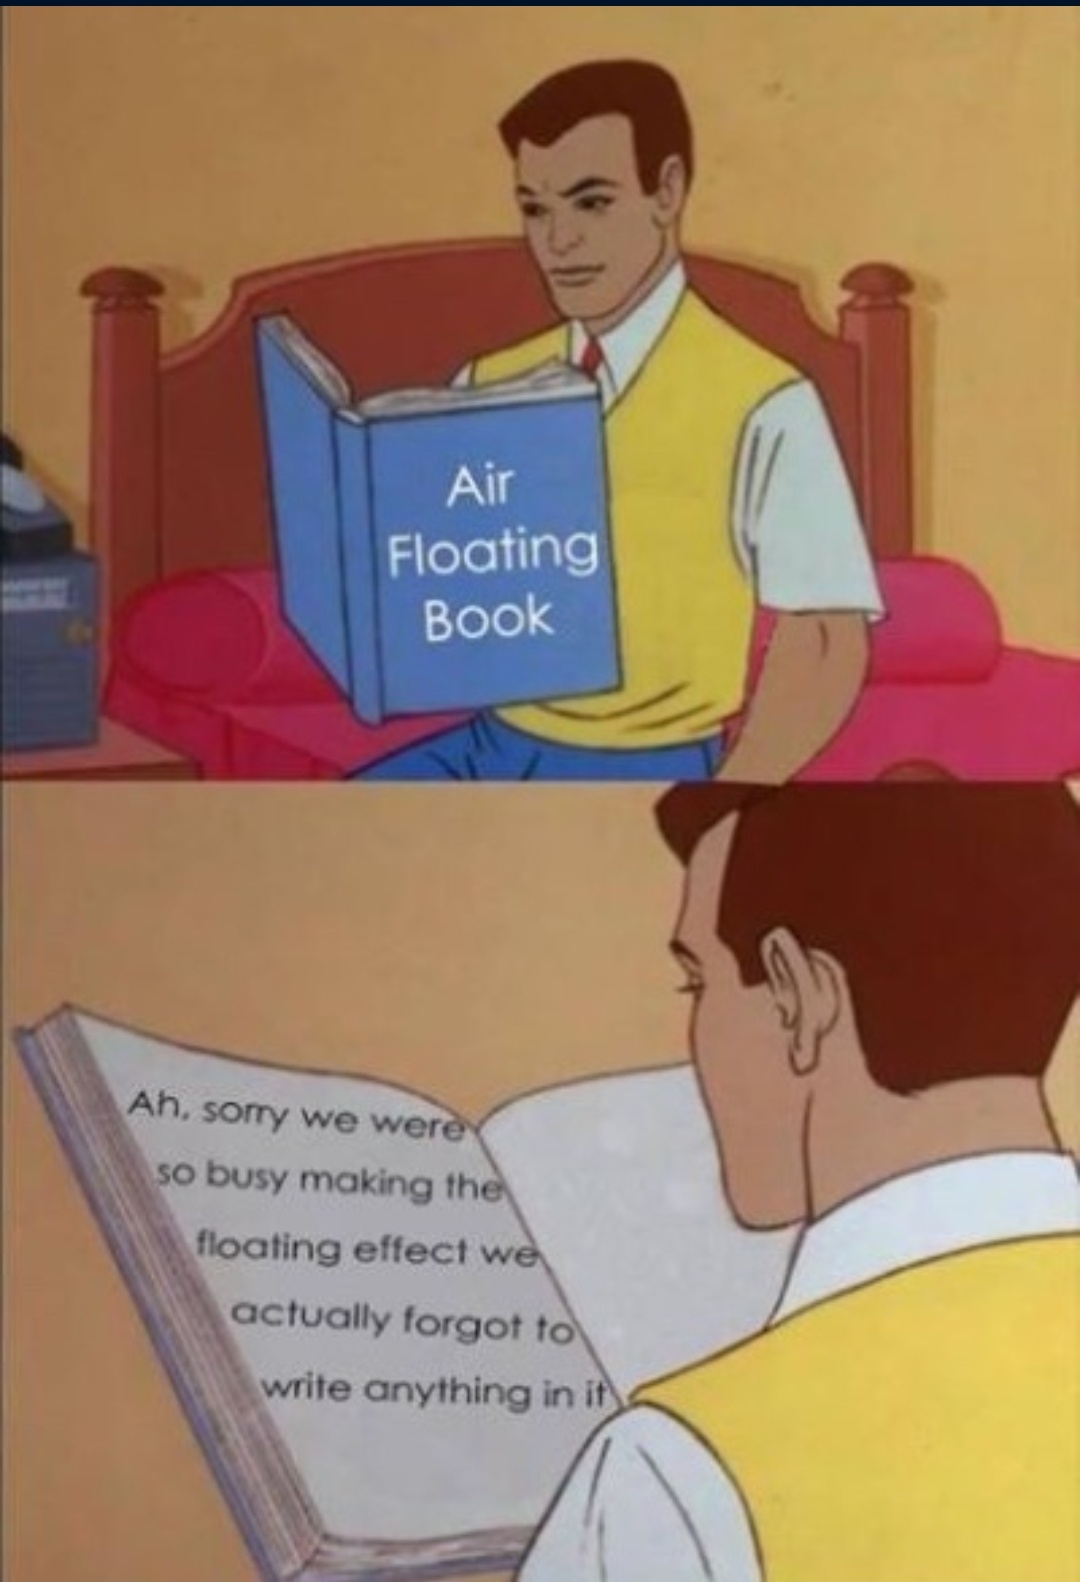 memes - book of faggots - Air Floating Book Ah, sorry we were so busy making the floating effect we actually forgot to write anything in it